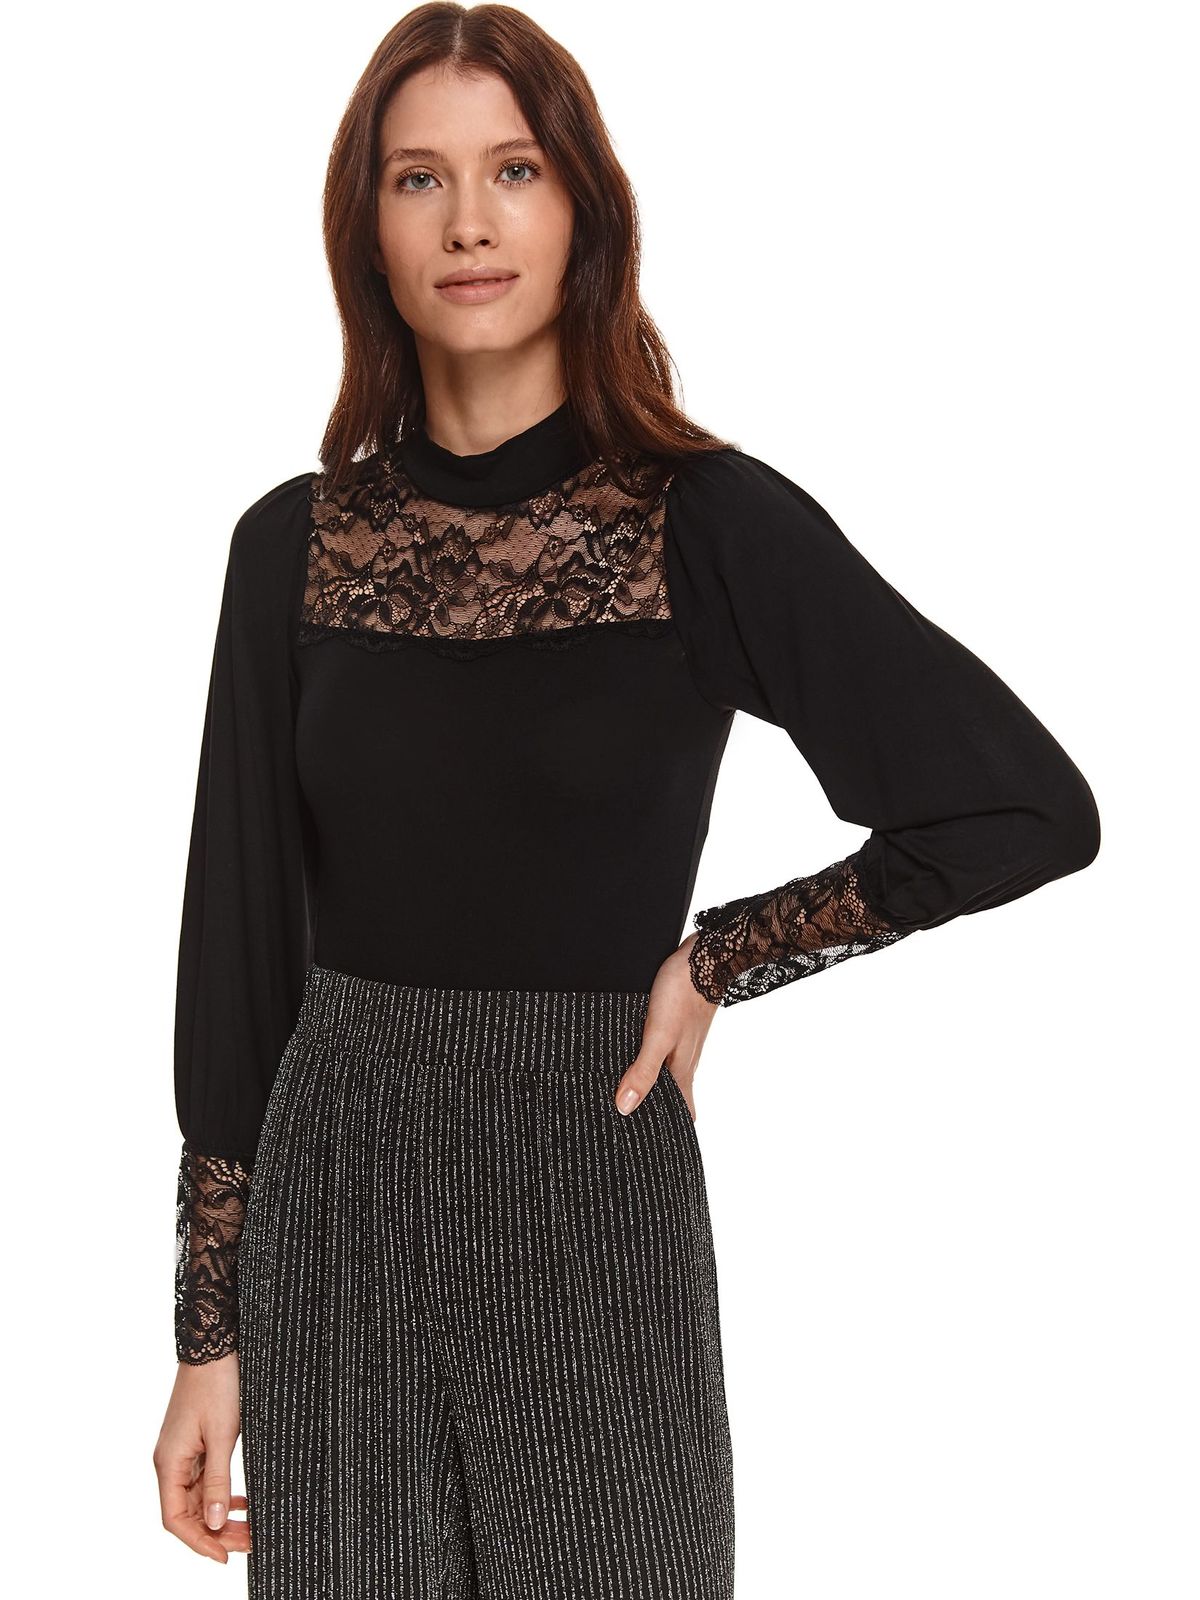 Black sweater with turtle neck with lace details